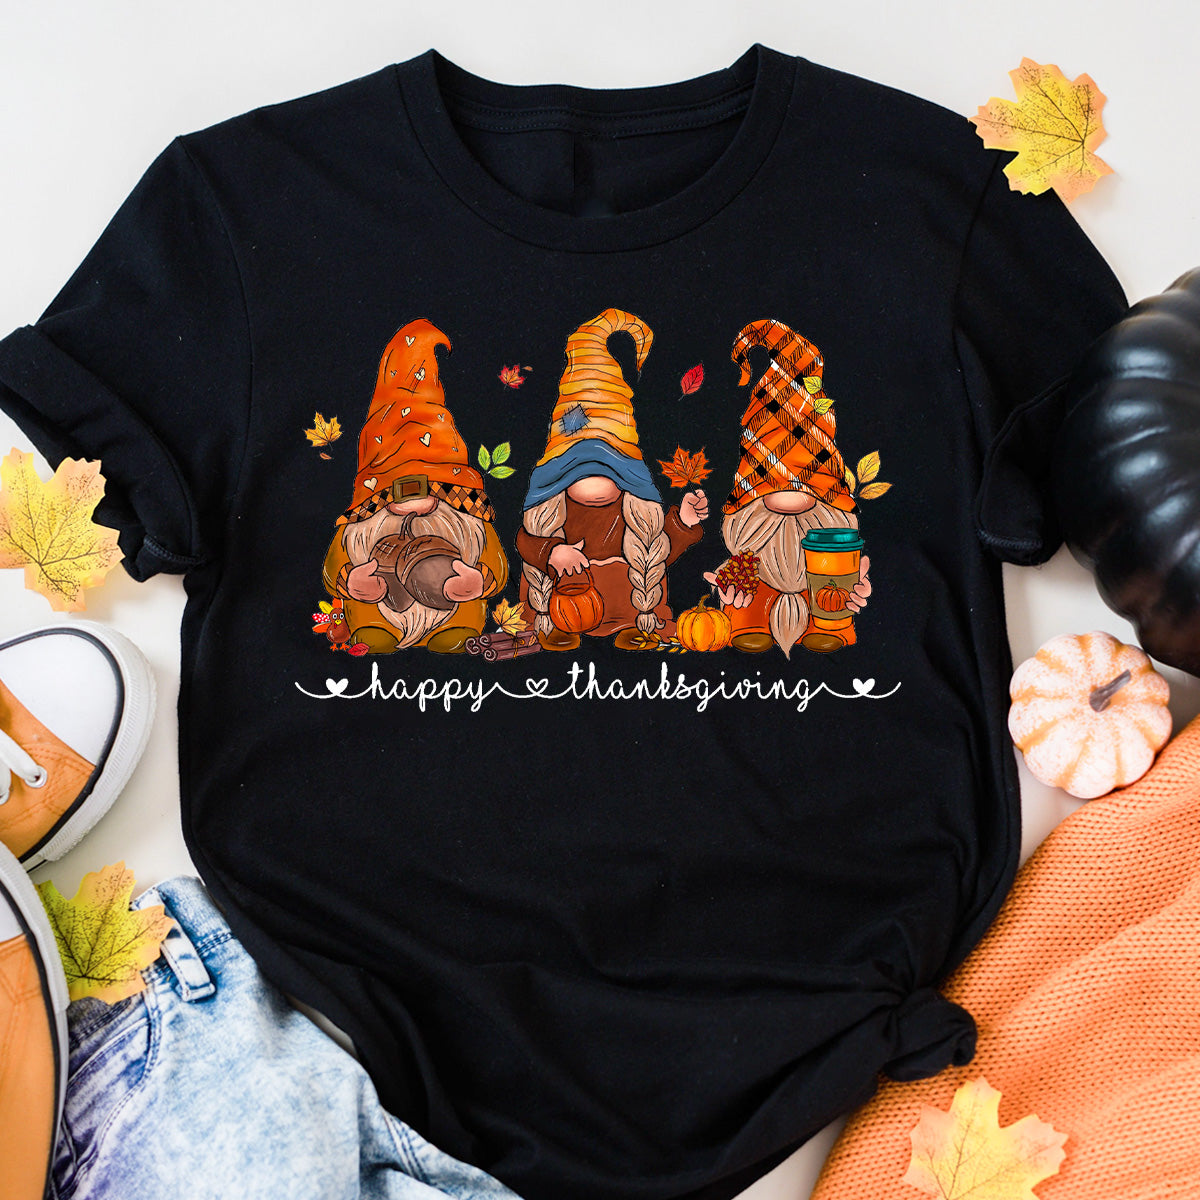 Happy Thanksgiving with Gnomes T-Shirt